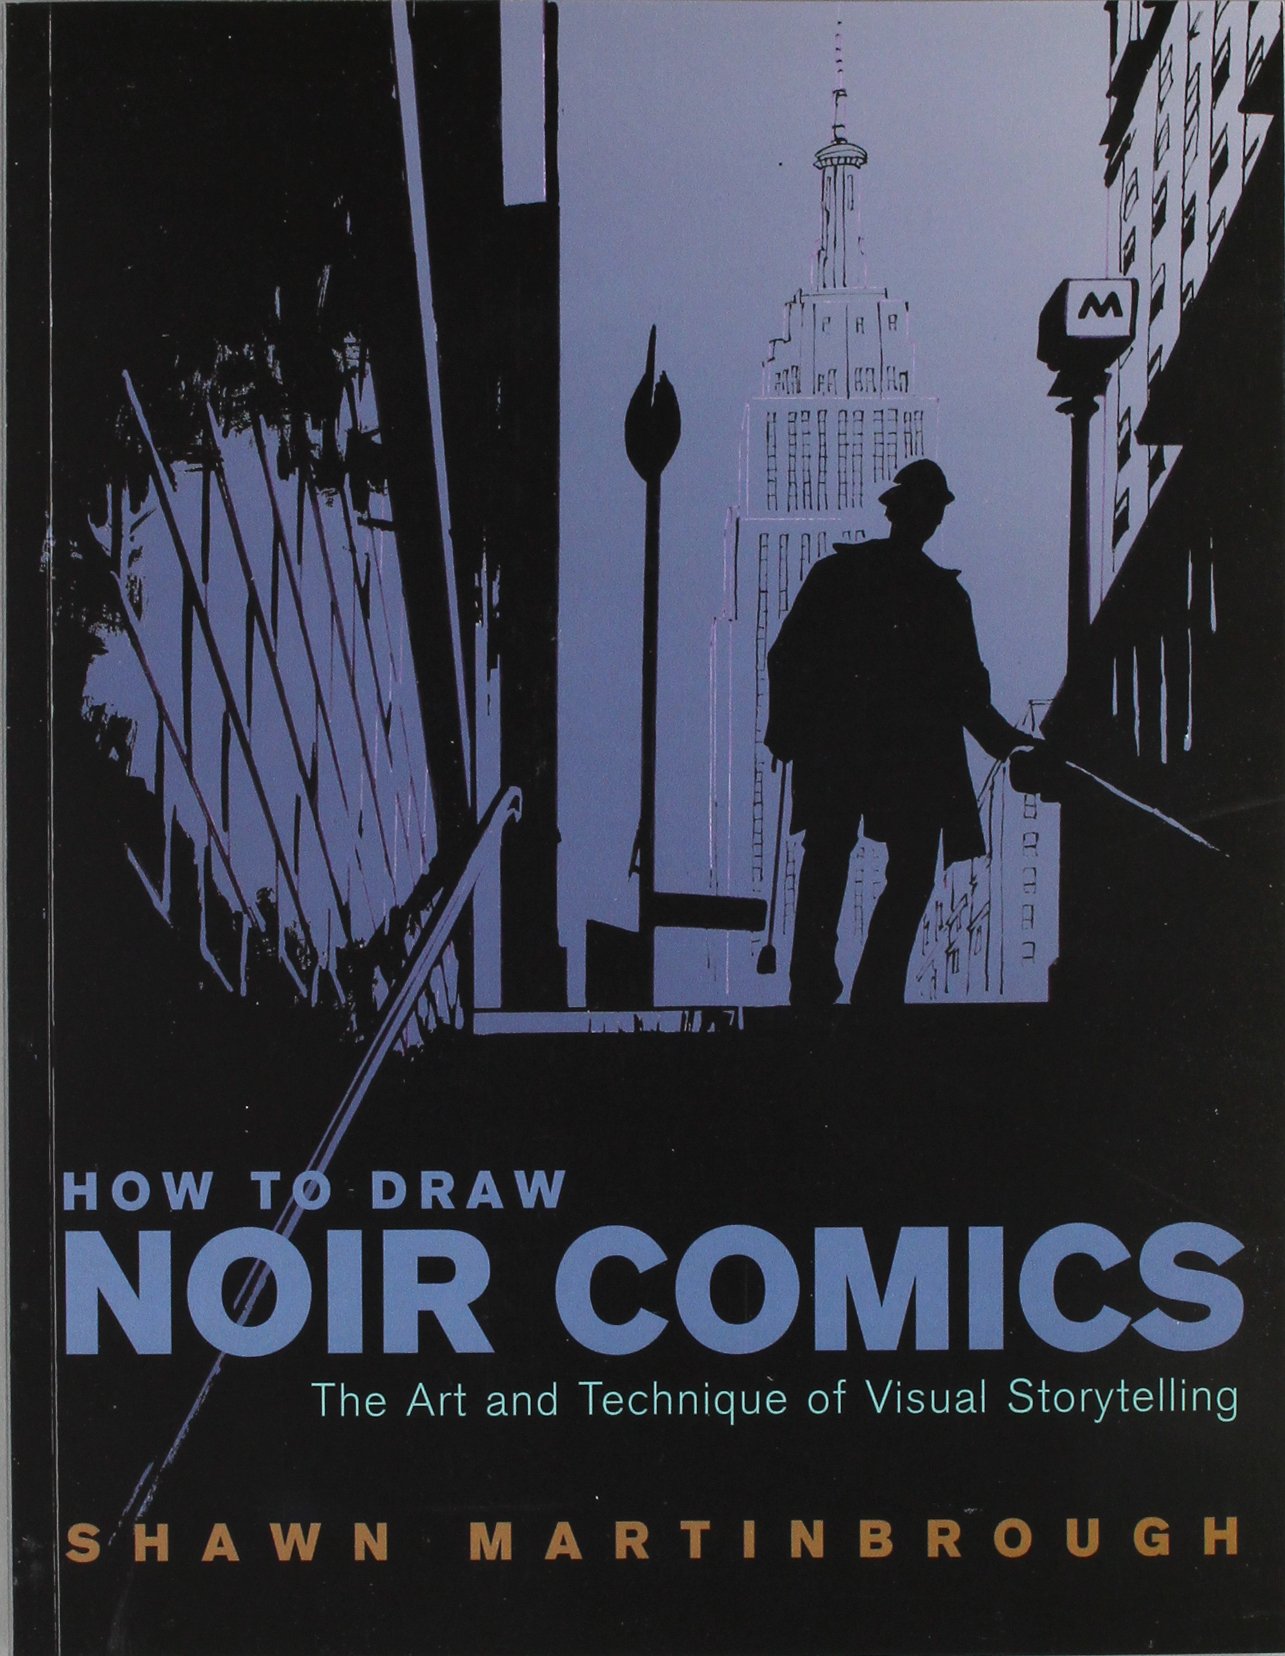 How to Draw Noir Comics - The Art and Technique of Visual Storytelling